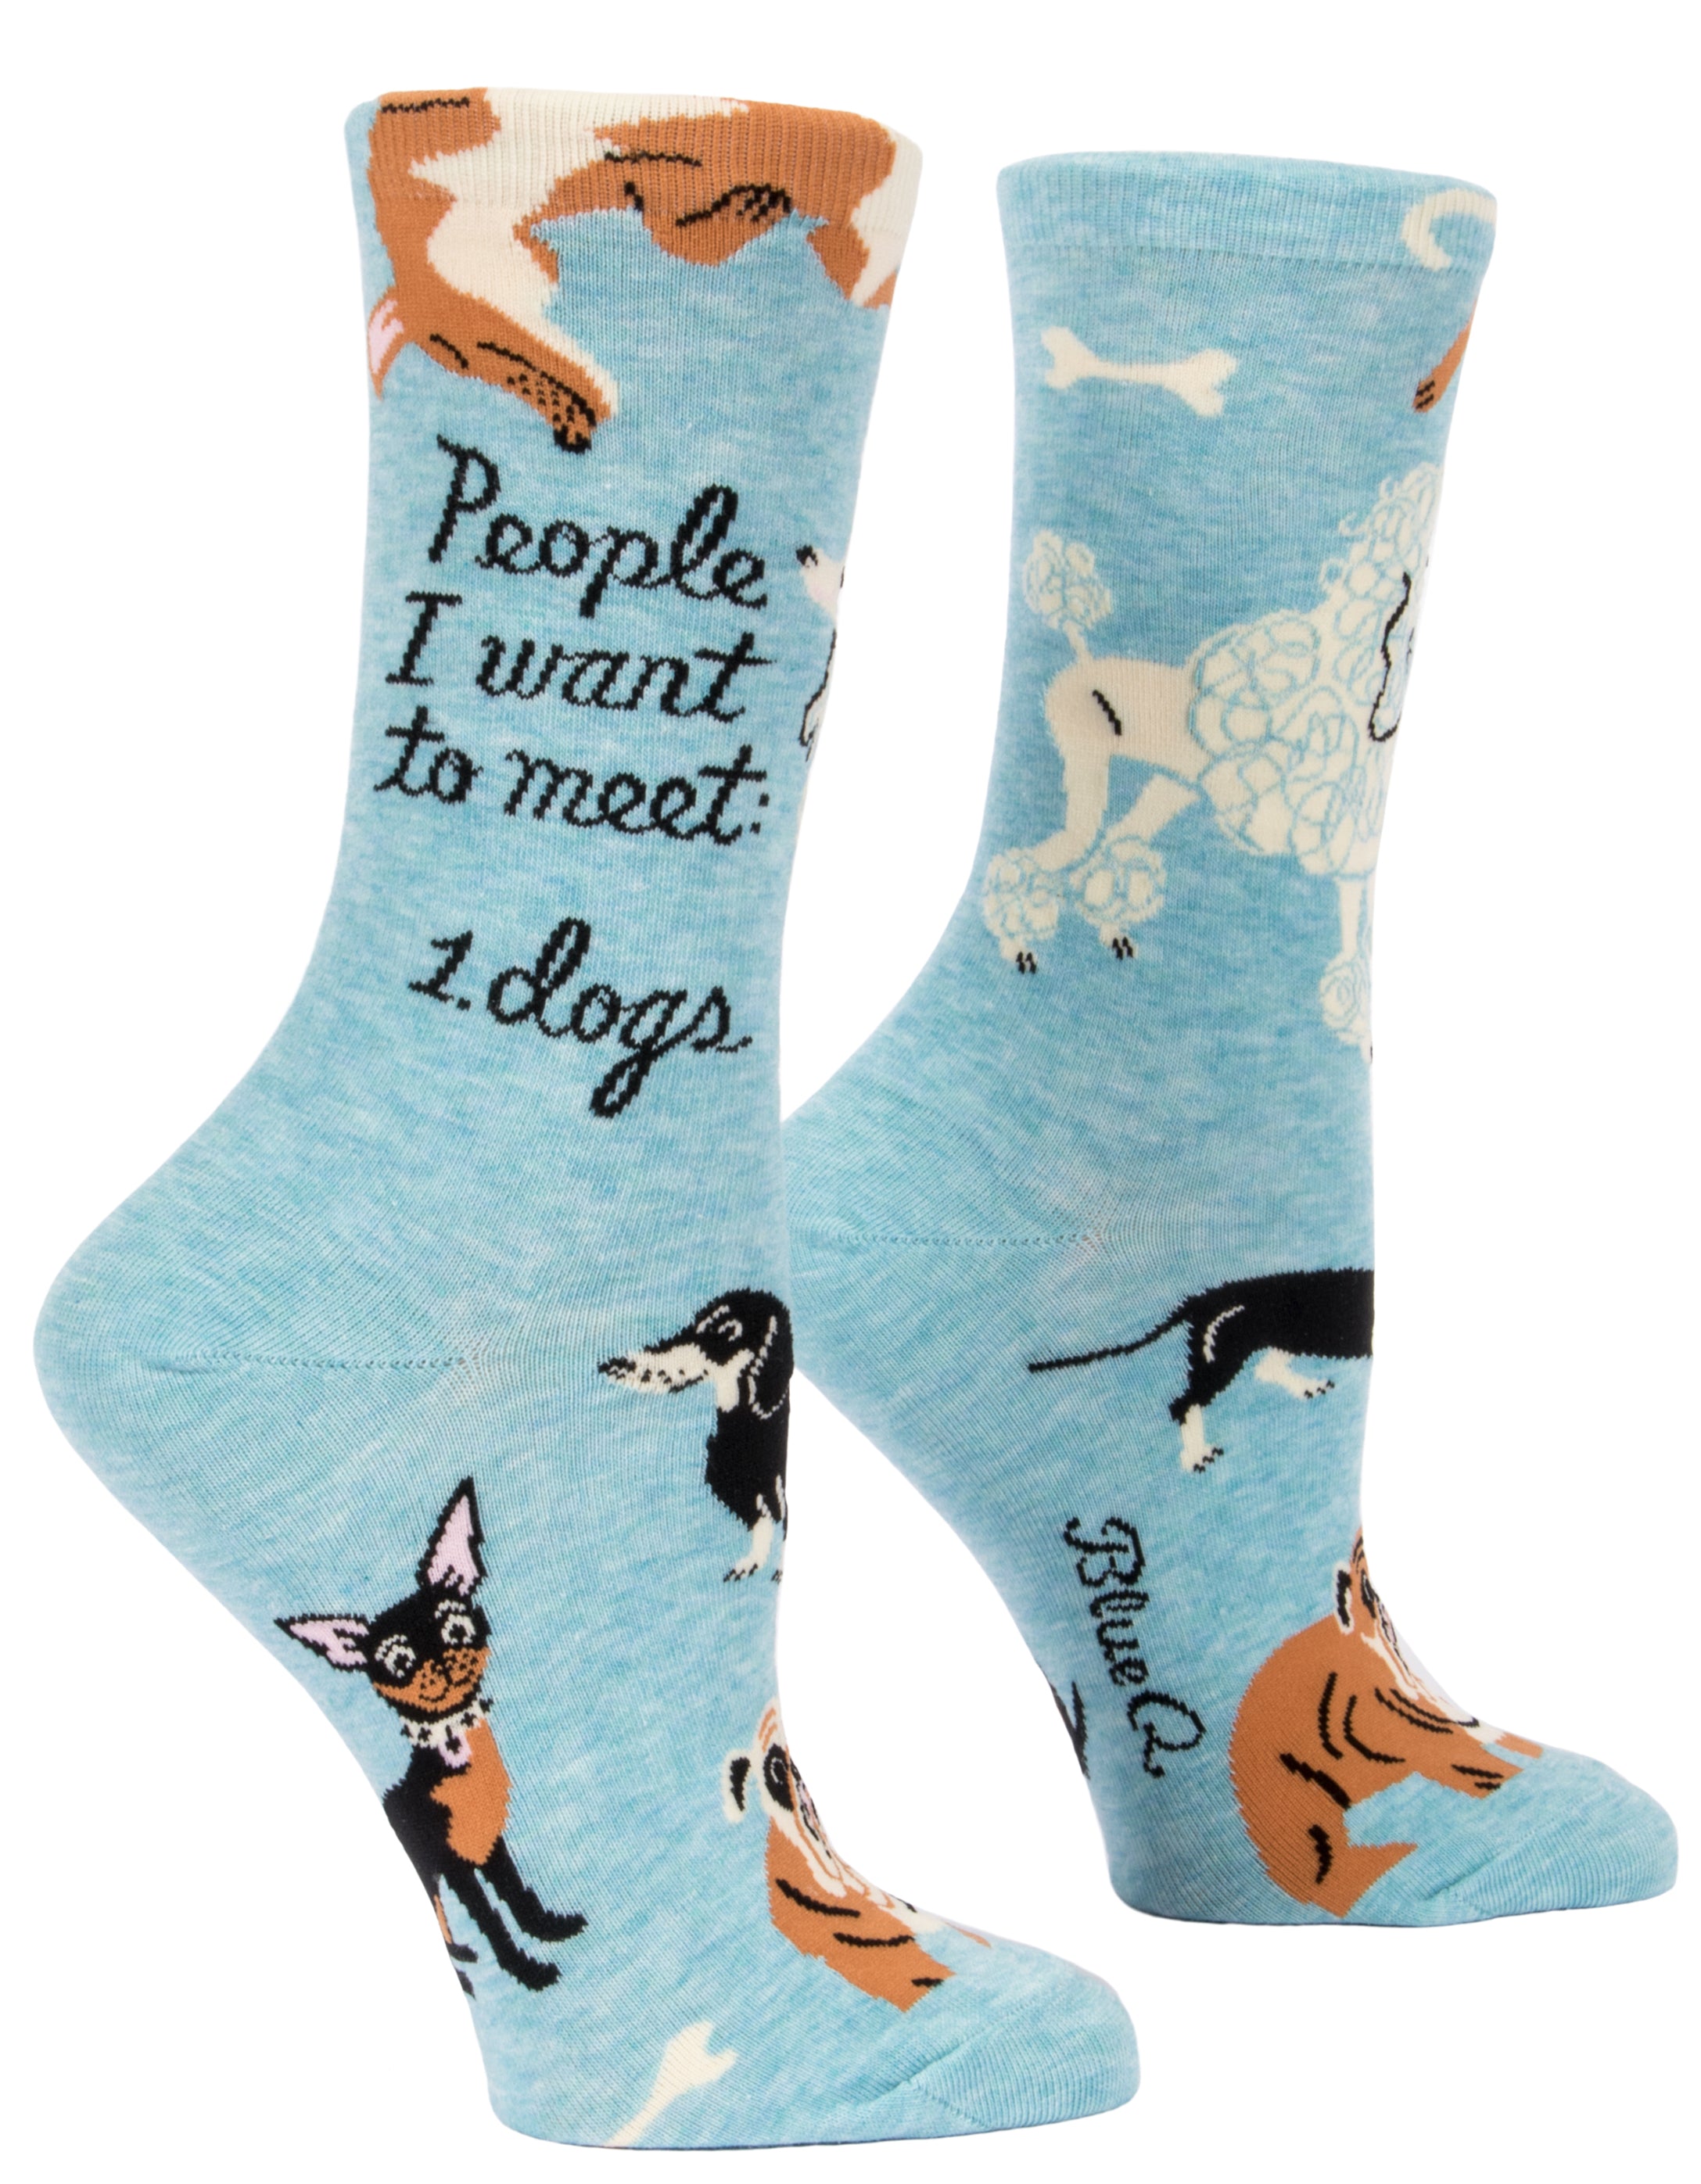 light blue socks with lots of dogs on ankle it says people i want to meet: 1.dogs